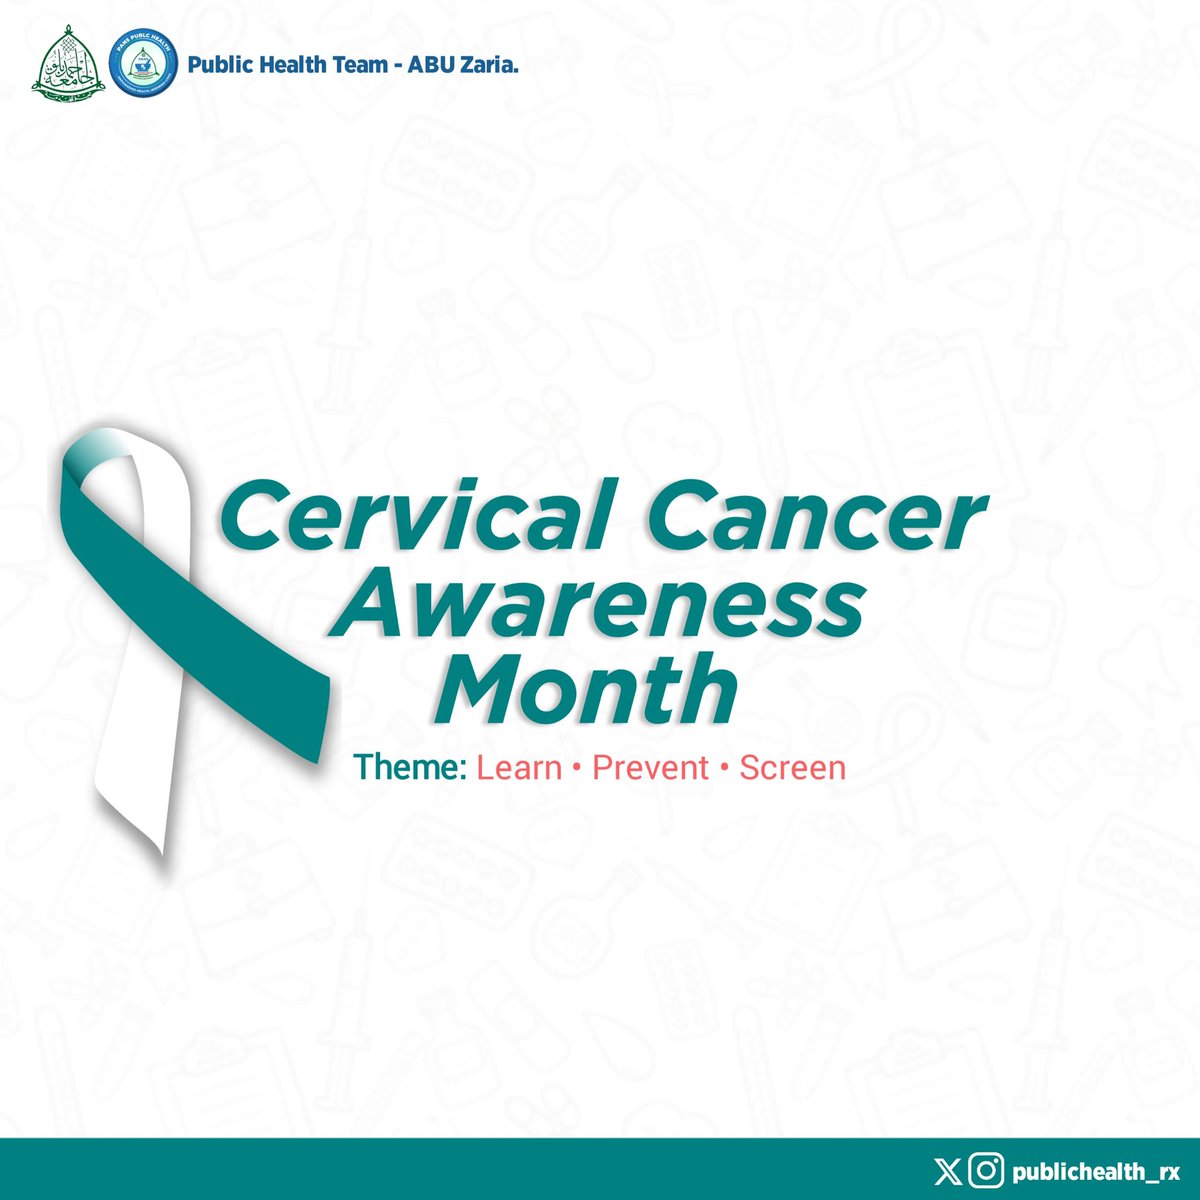 Let's break the silence on cervical cancer, champion screenings, and spread knowledge. Together, we can conquer.  #CervicalHealth #PreventionIsPower' #publichealth